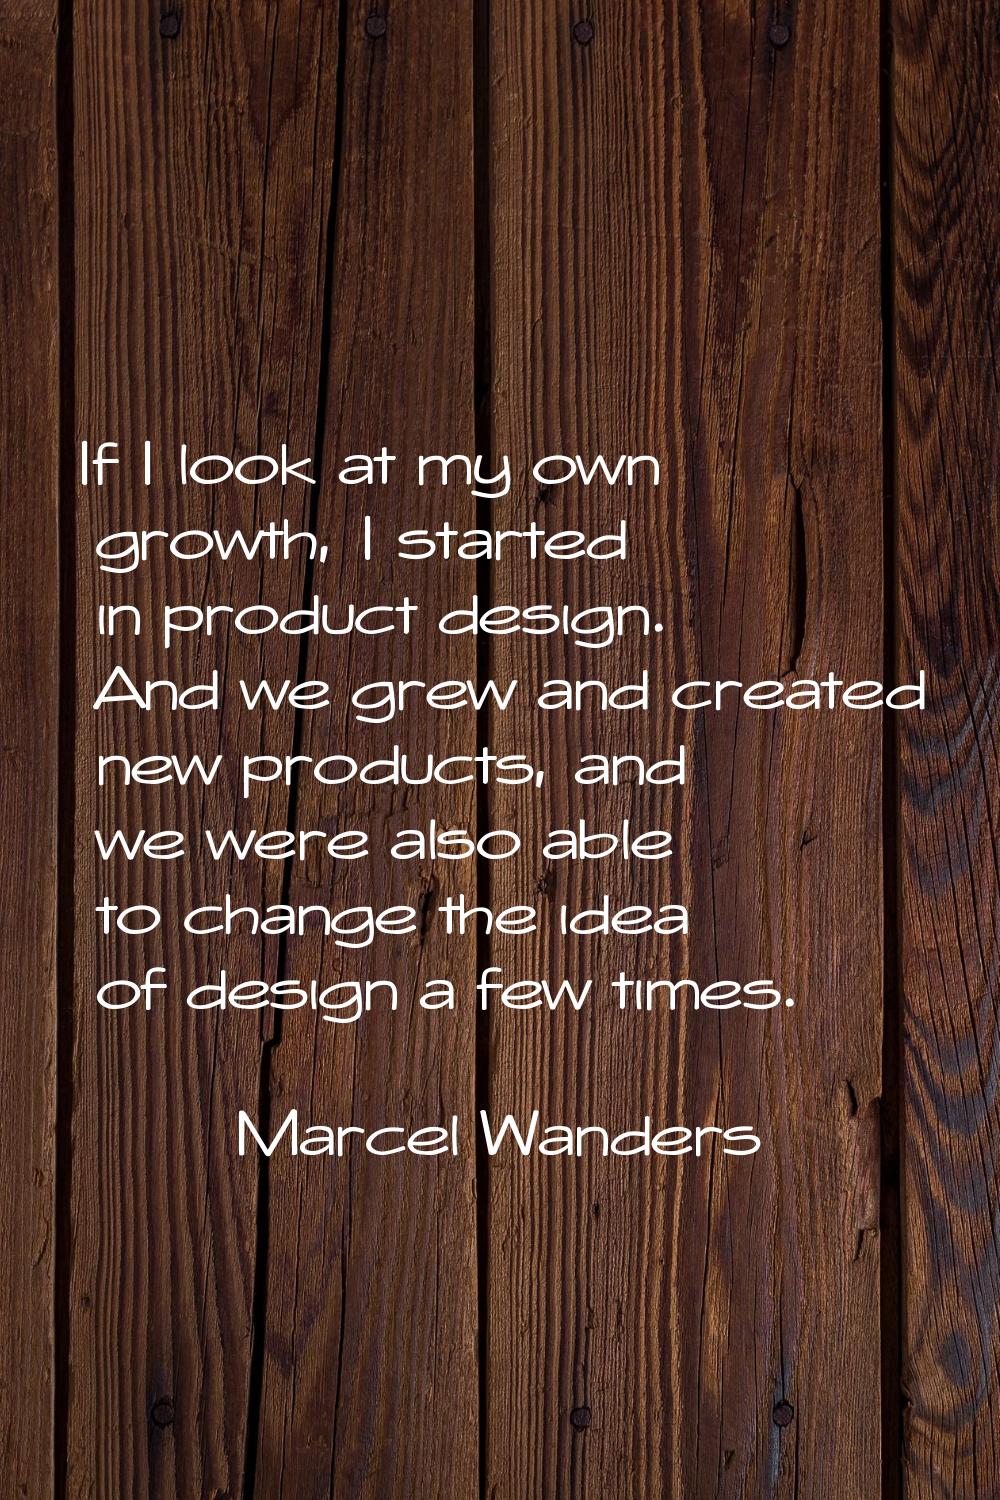 If I look at my own growth, I started in product design. And we grew and created new products, and 